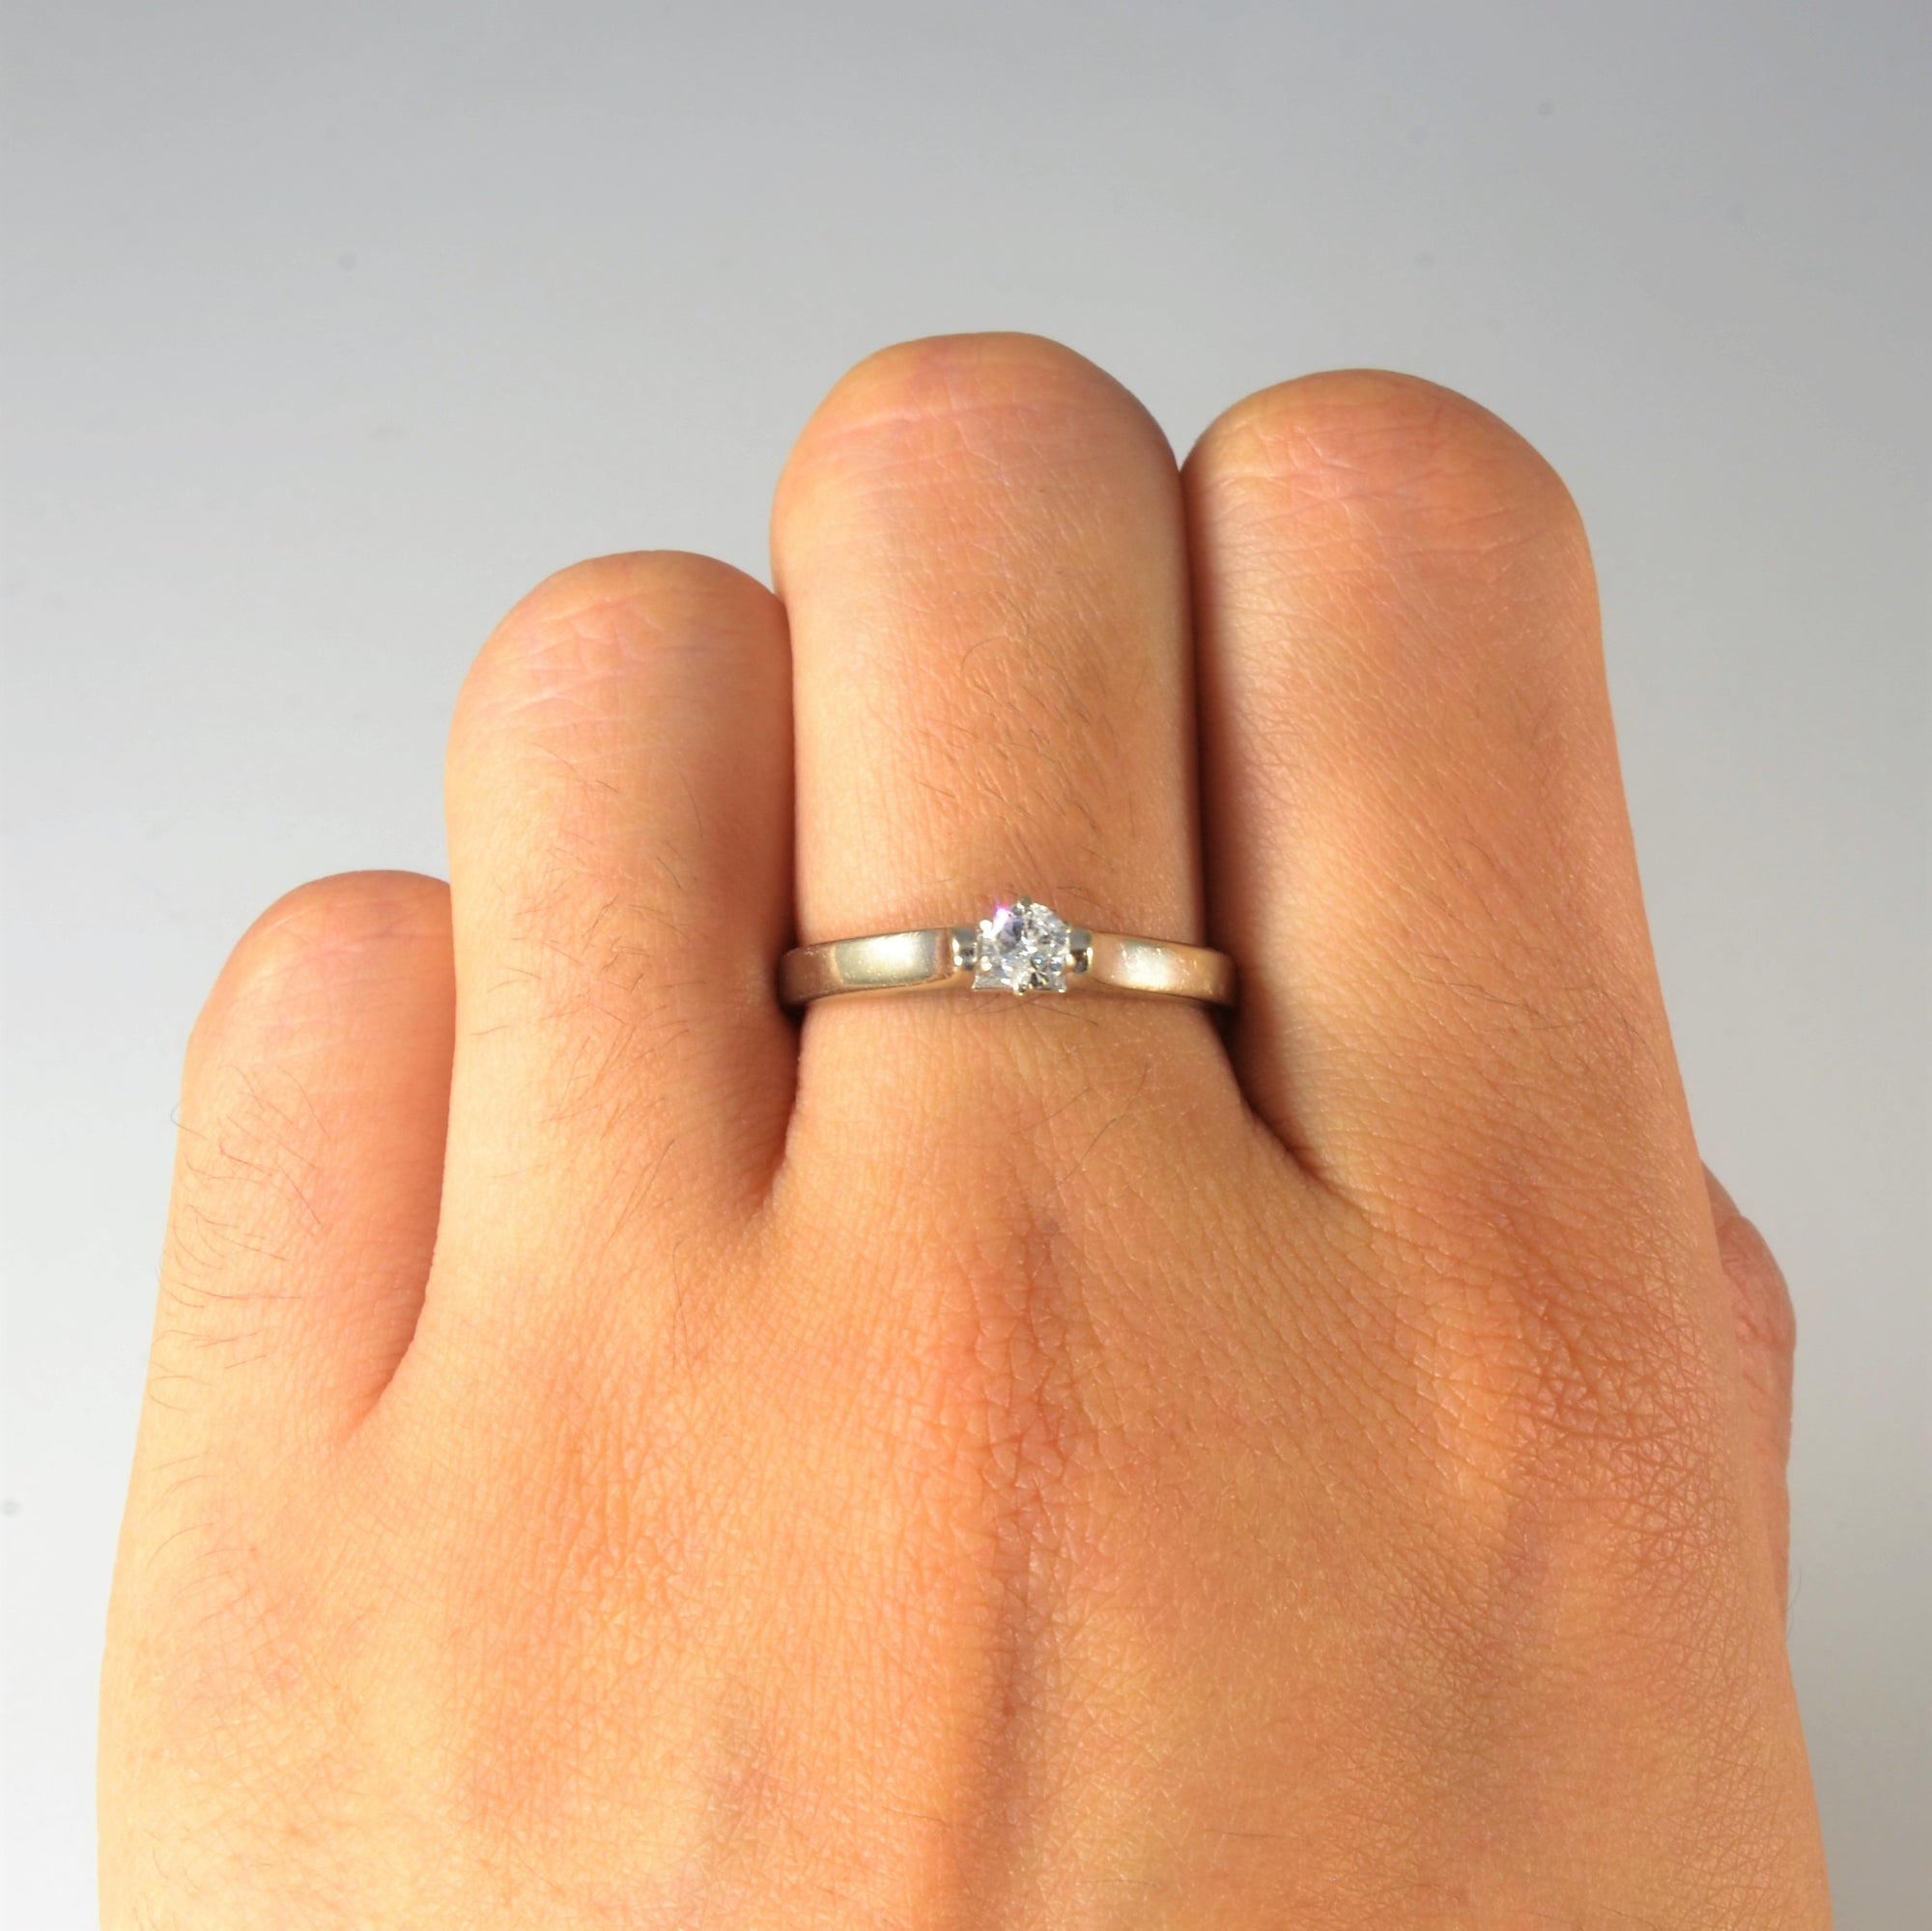 Tapered Solitaire Diamond Ring | 0.15ct | SZ 7 |